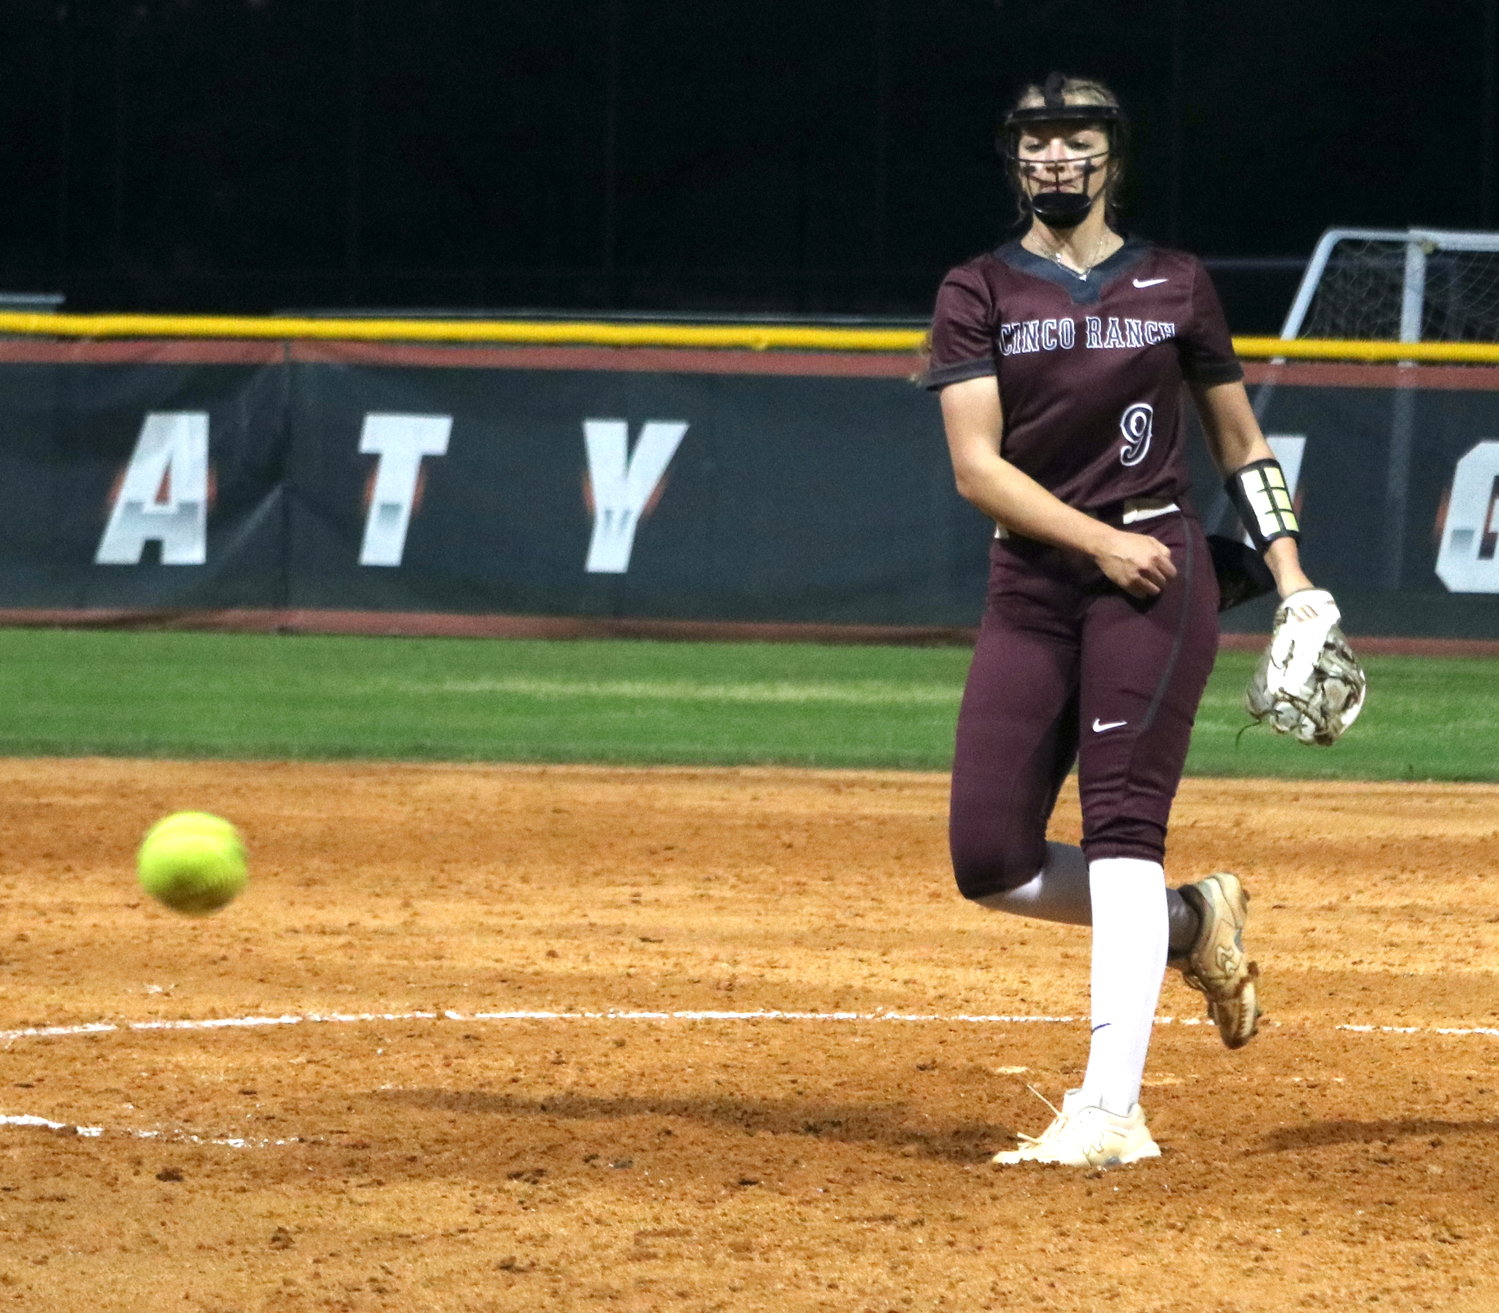 Chela Kovar pitches during Friday's District 19-6A game between Katy and Cinco Ranch at the Katy softball field.